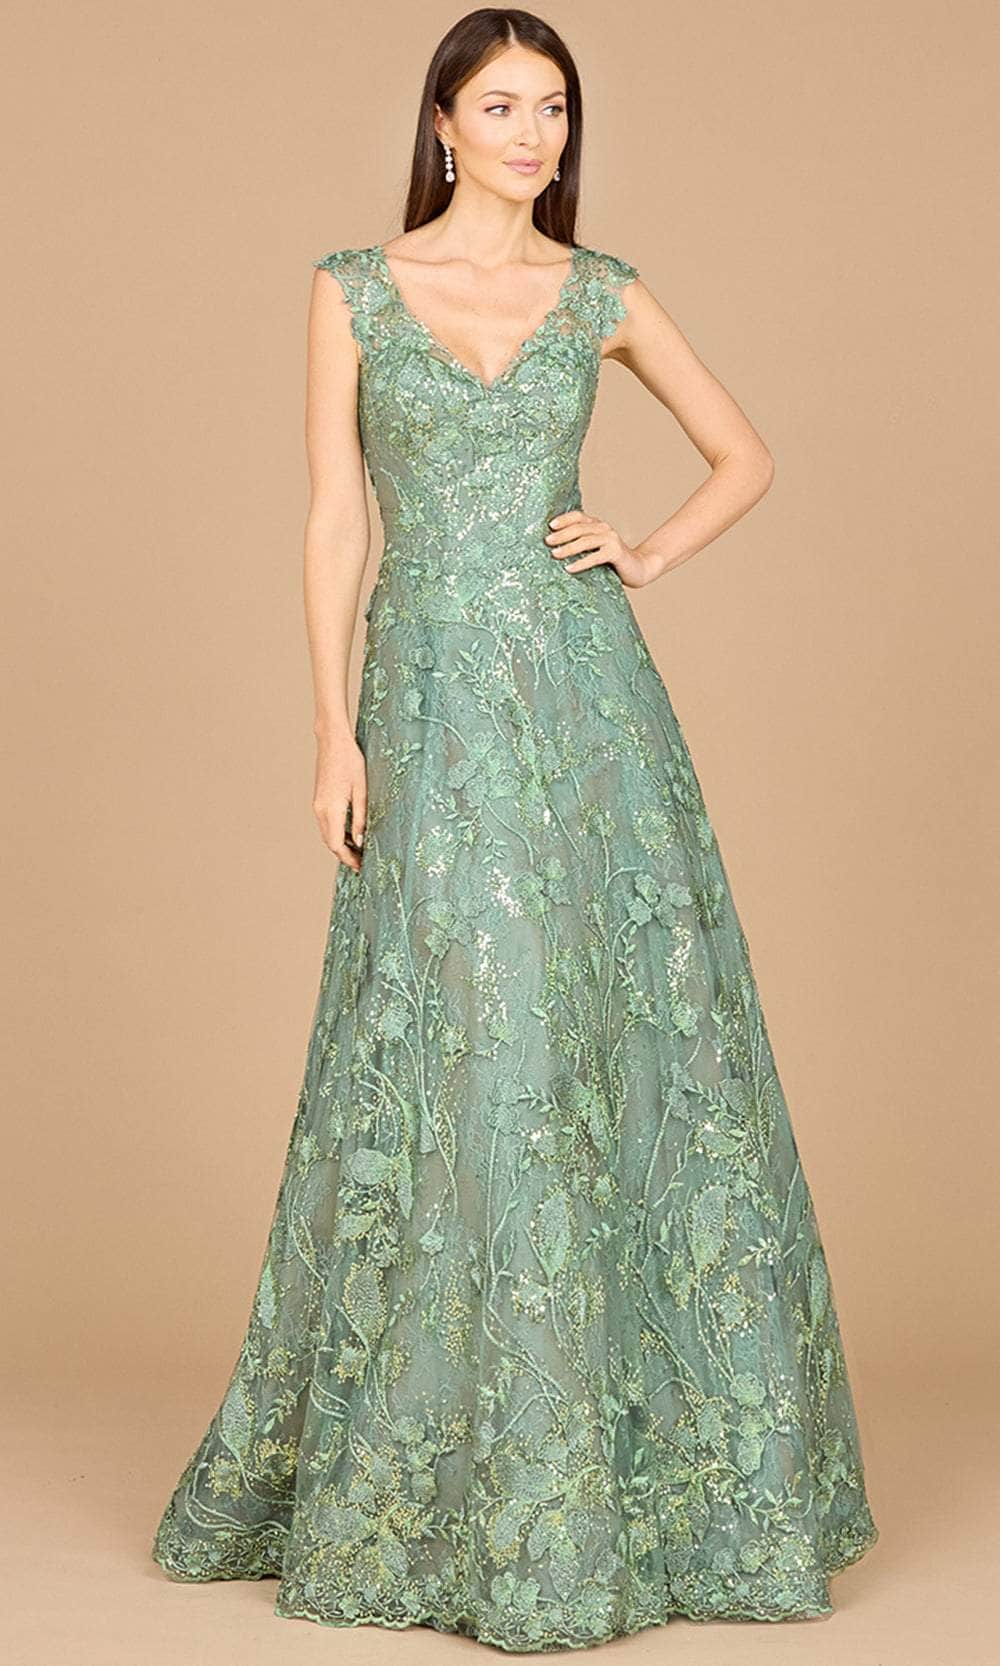 Image of Lara Dresses 29017 - Floral Pattern Evening Gown